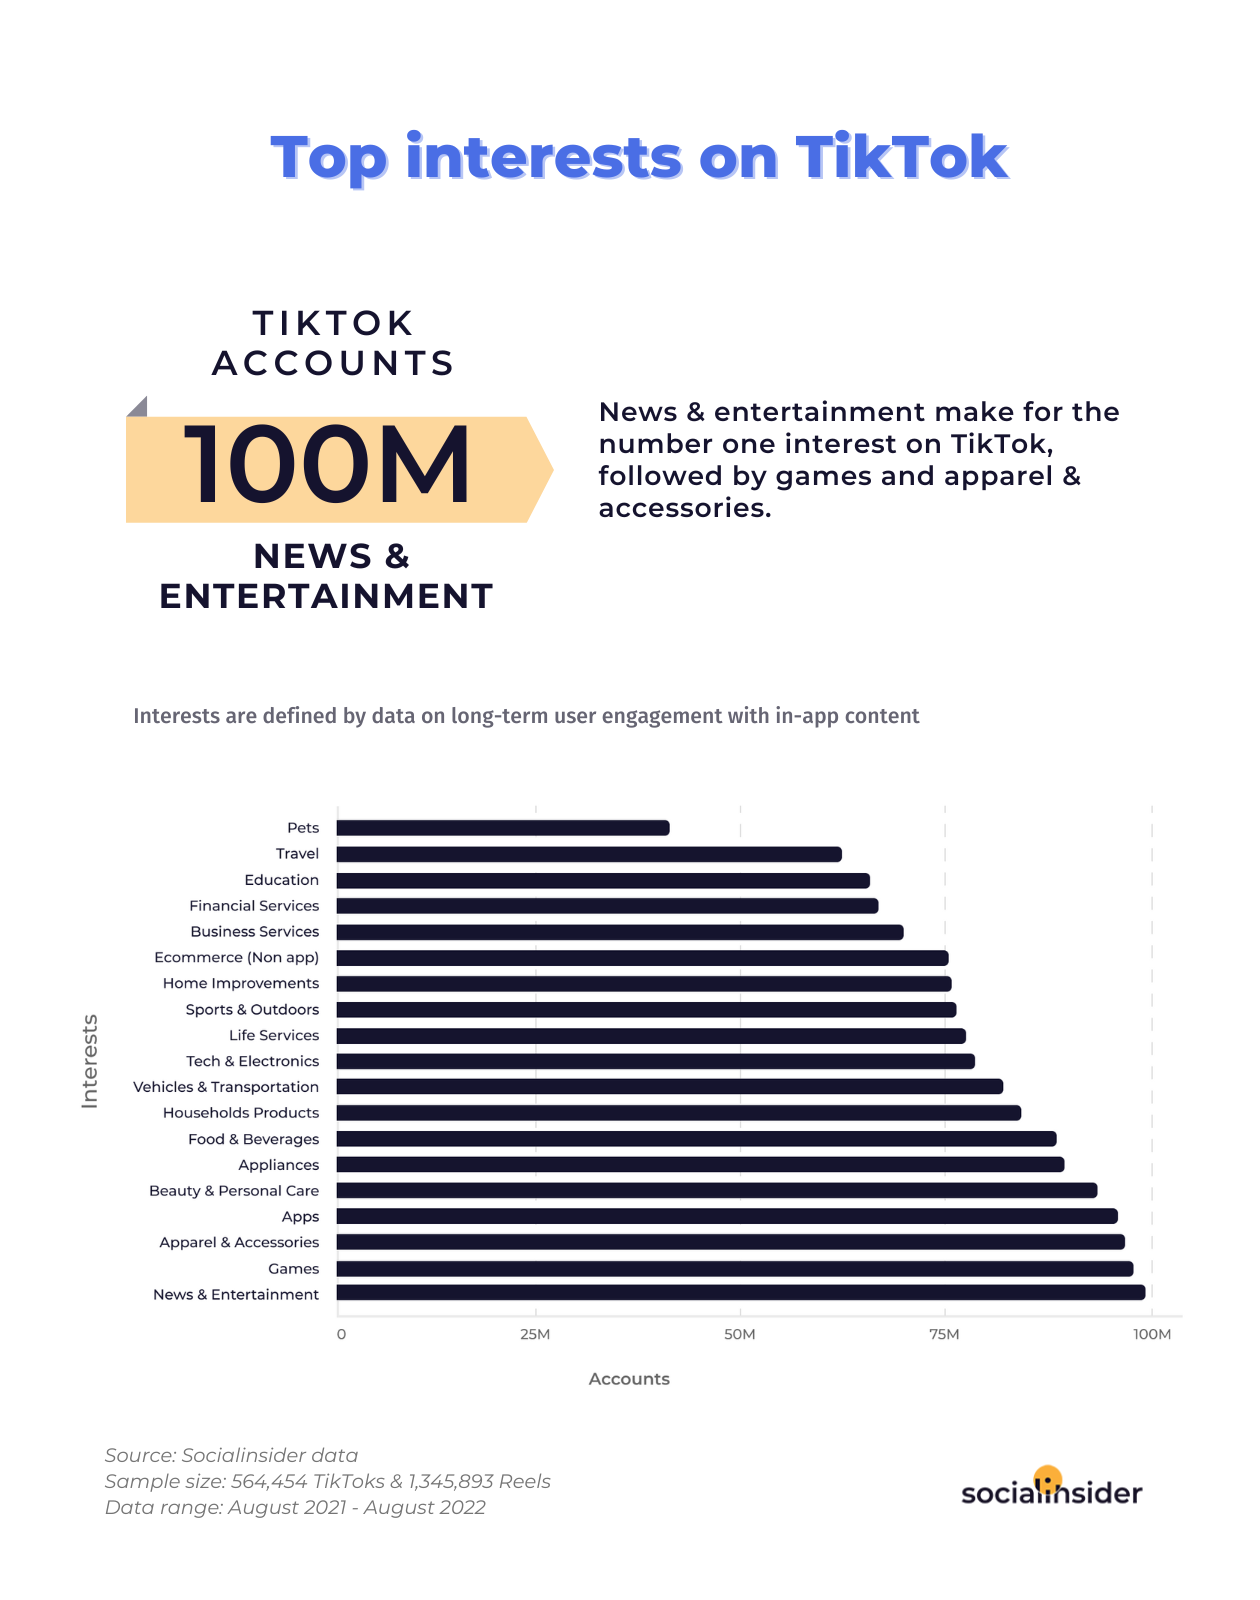 Here is a chart showing what are the top interests on TikTok in 2022.